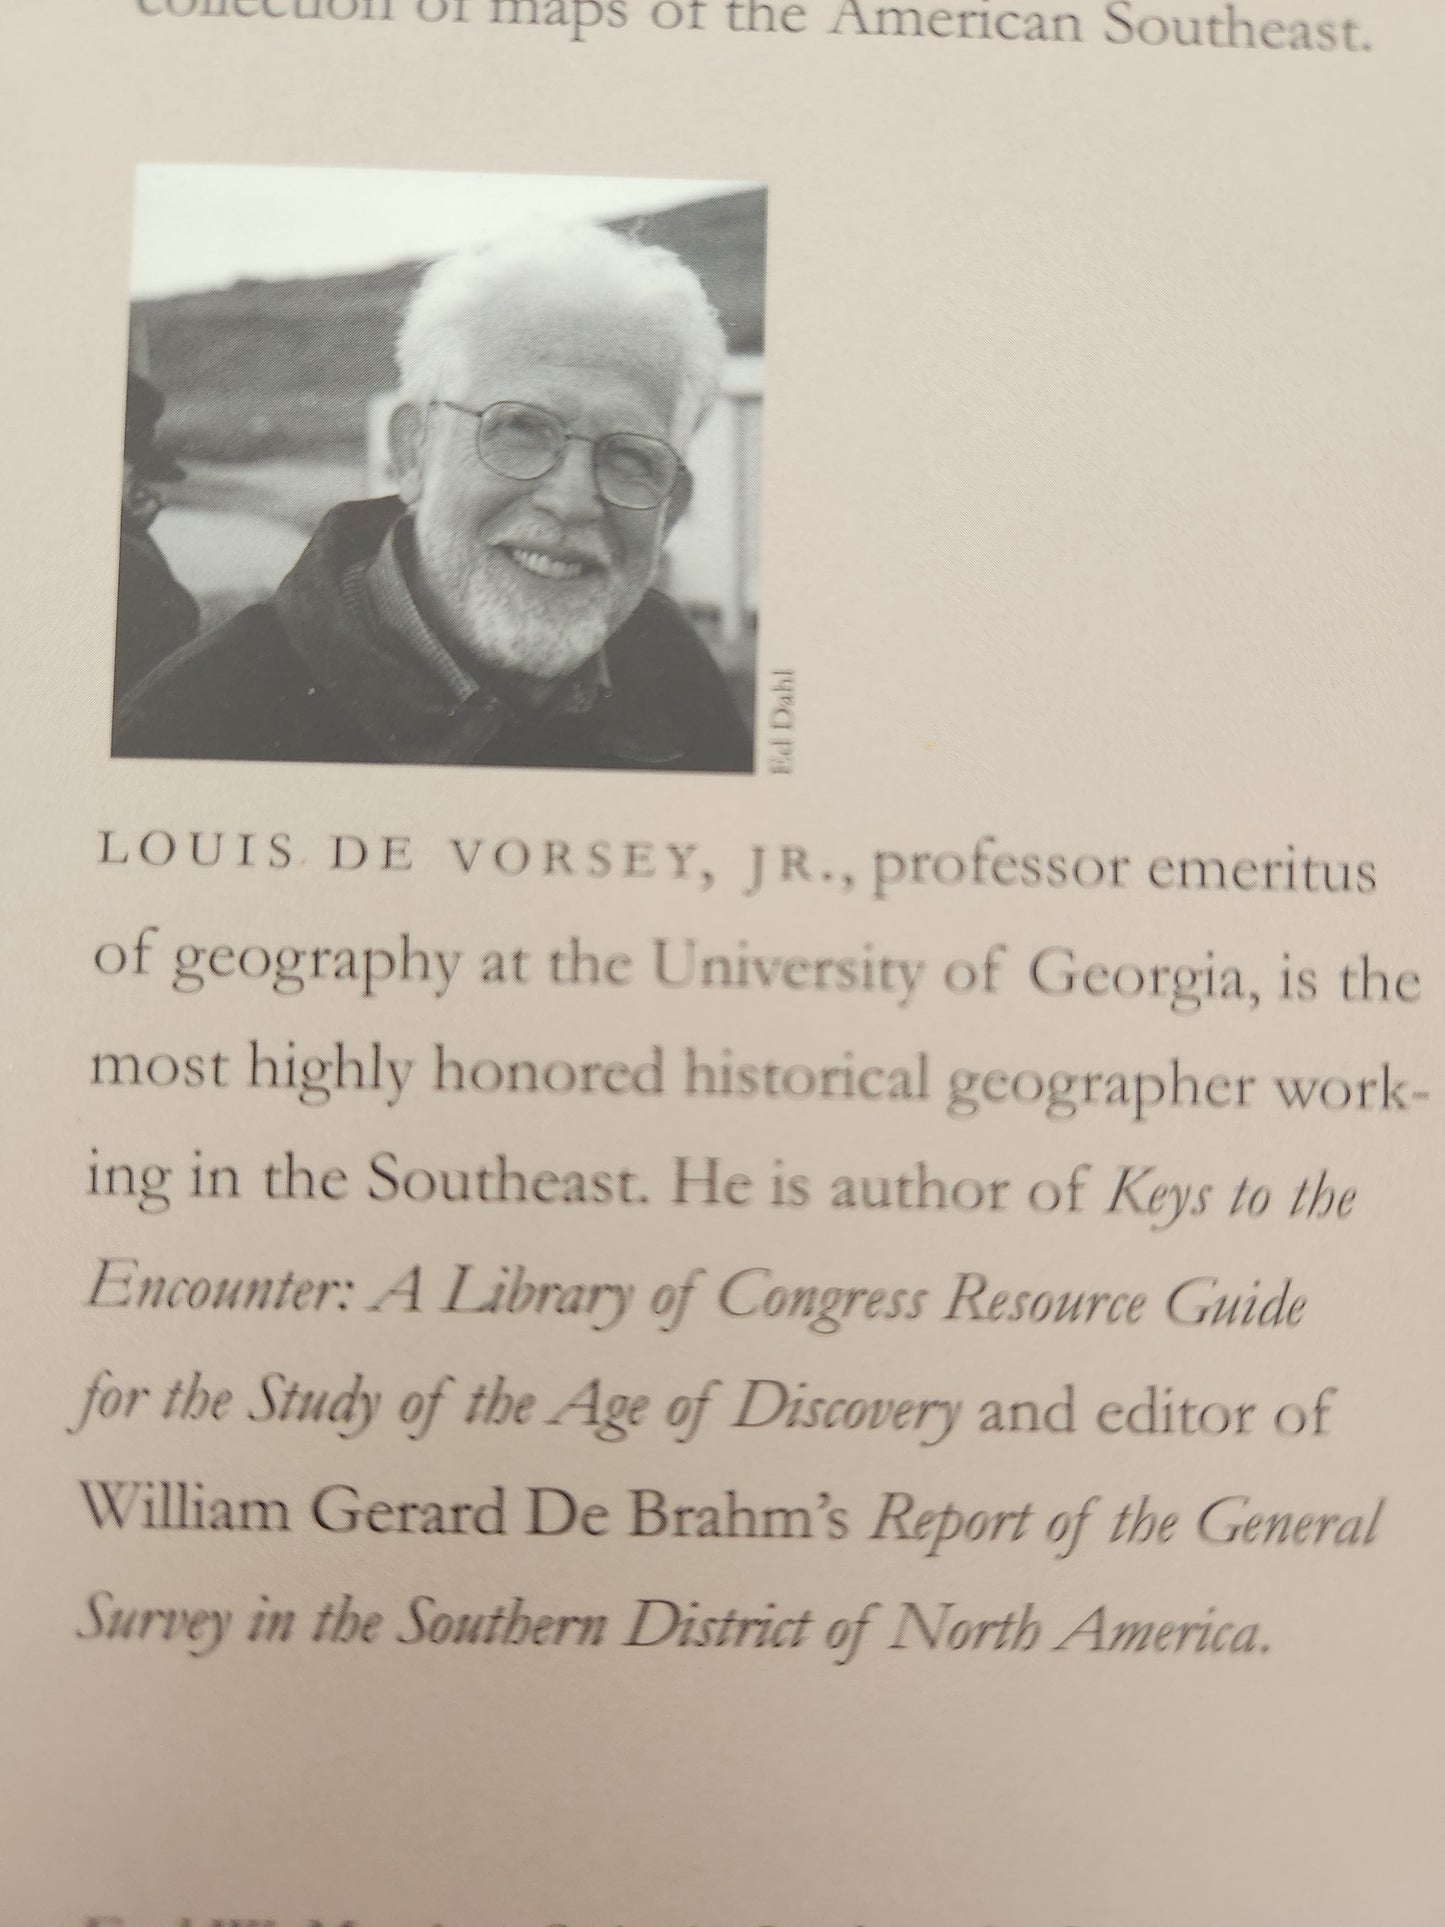 The Southeast In Early Maps by William P. Cumming 3rd Edition (1998)